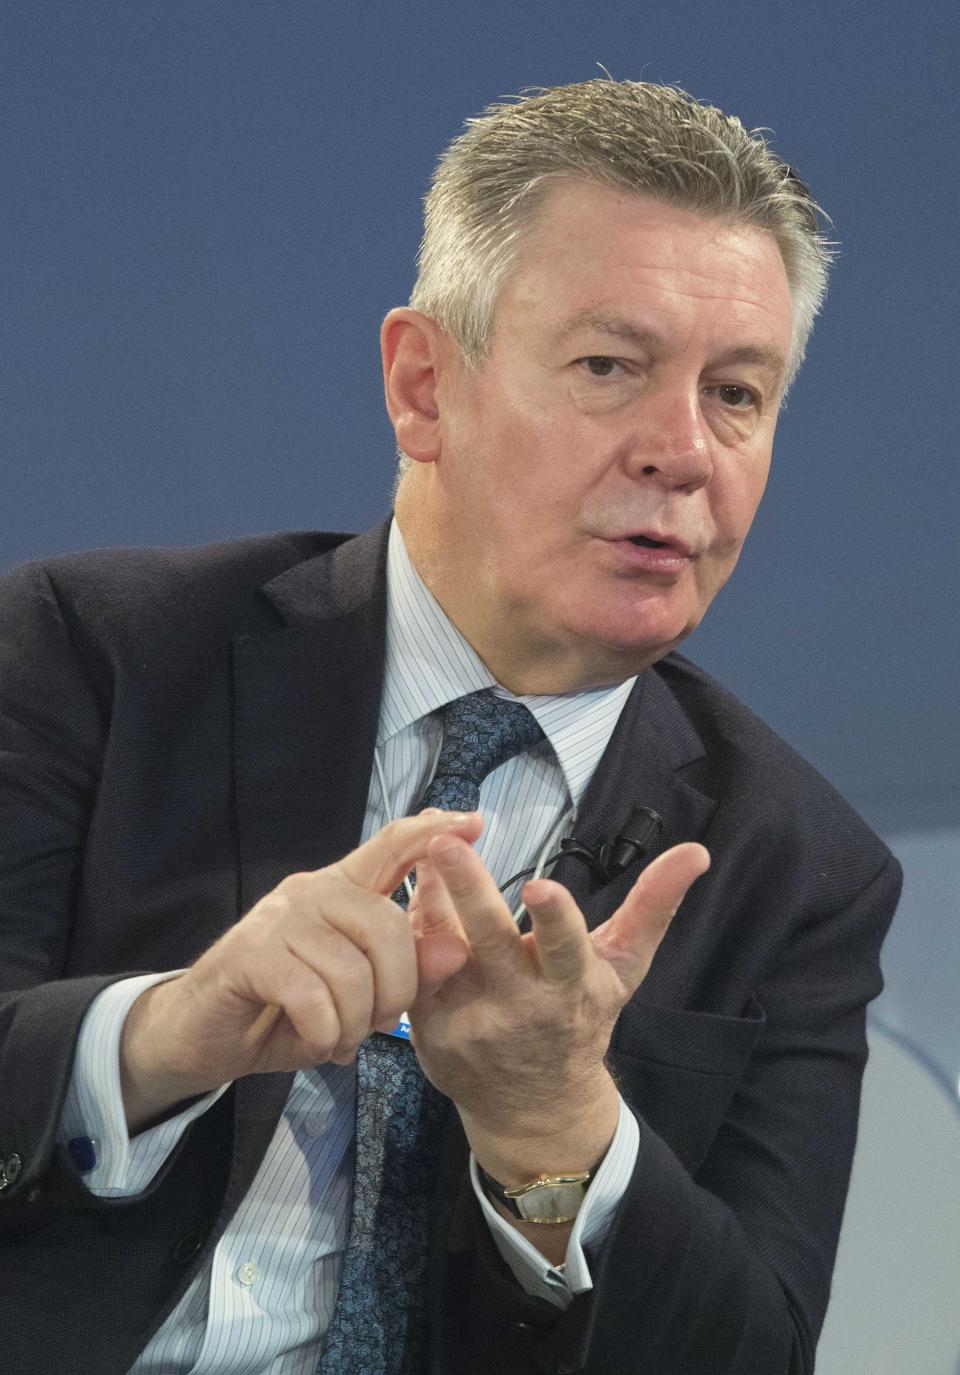 EU Trade Commissioner Karel De Gucht, gestures as he speaks with U.S. Trade Representative Michael Froman prior to a session at the World Economic Forum in Davos, Switzerland, Saturday, Jan. 25, 2014. Global leaders argued Friday that efforts to eradicate poverty must be linked to climate change, saying that rising temperatures will have widespread effects on everything from food supplies to education. (AP Photo/Michel Euler)